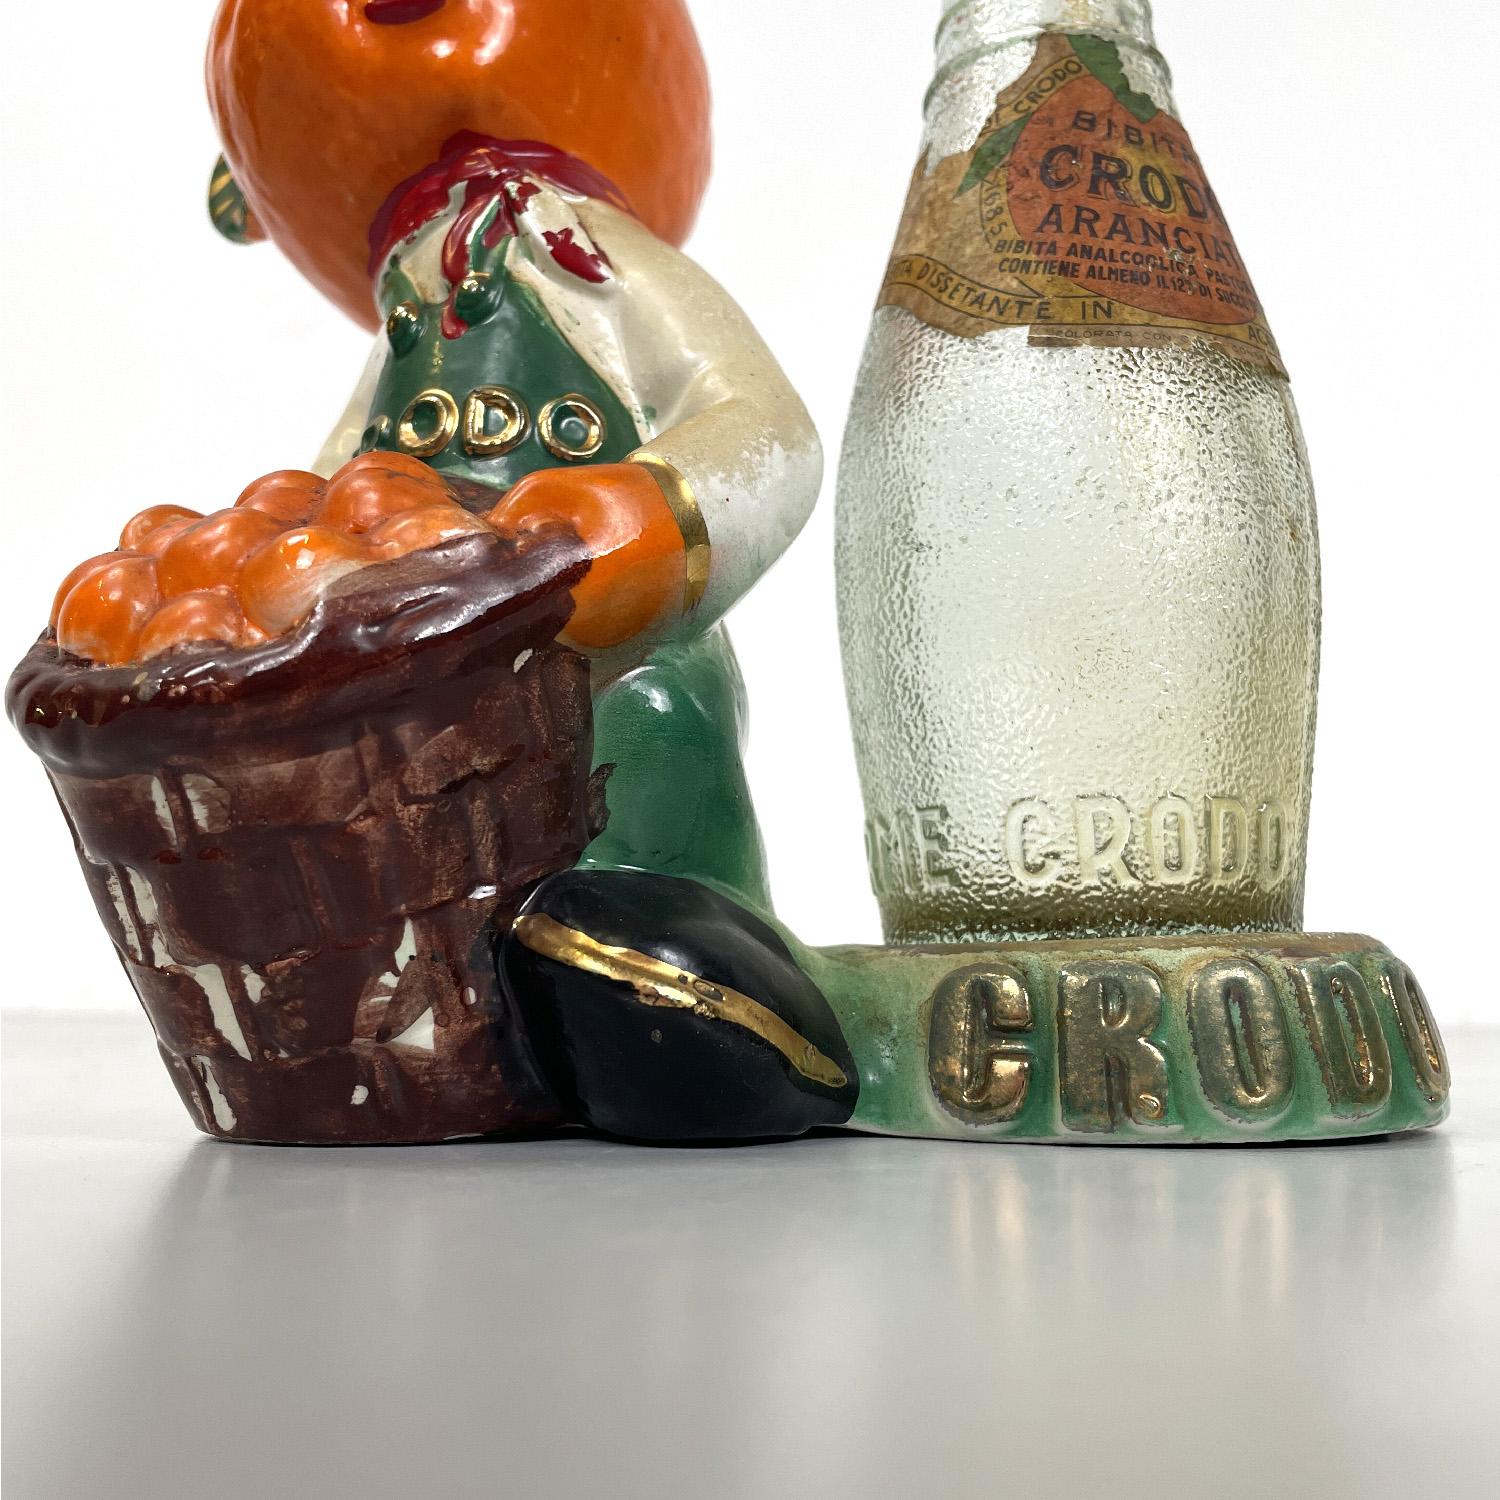 Italian mid-century modern Crodo advertising sculpture with glass bottle, 1960s For Sale 6